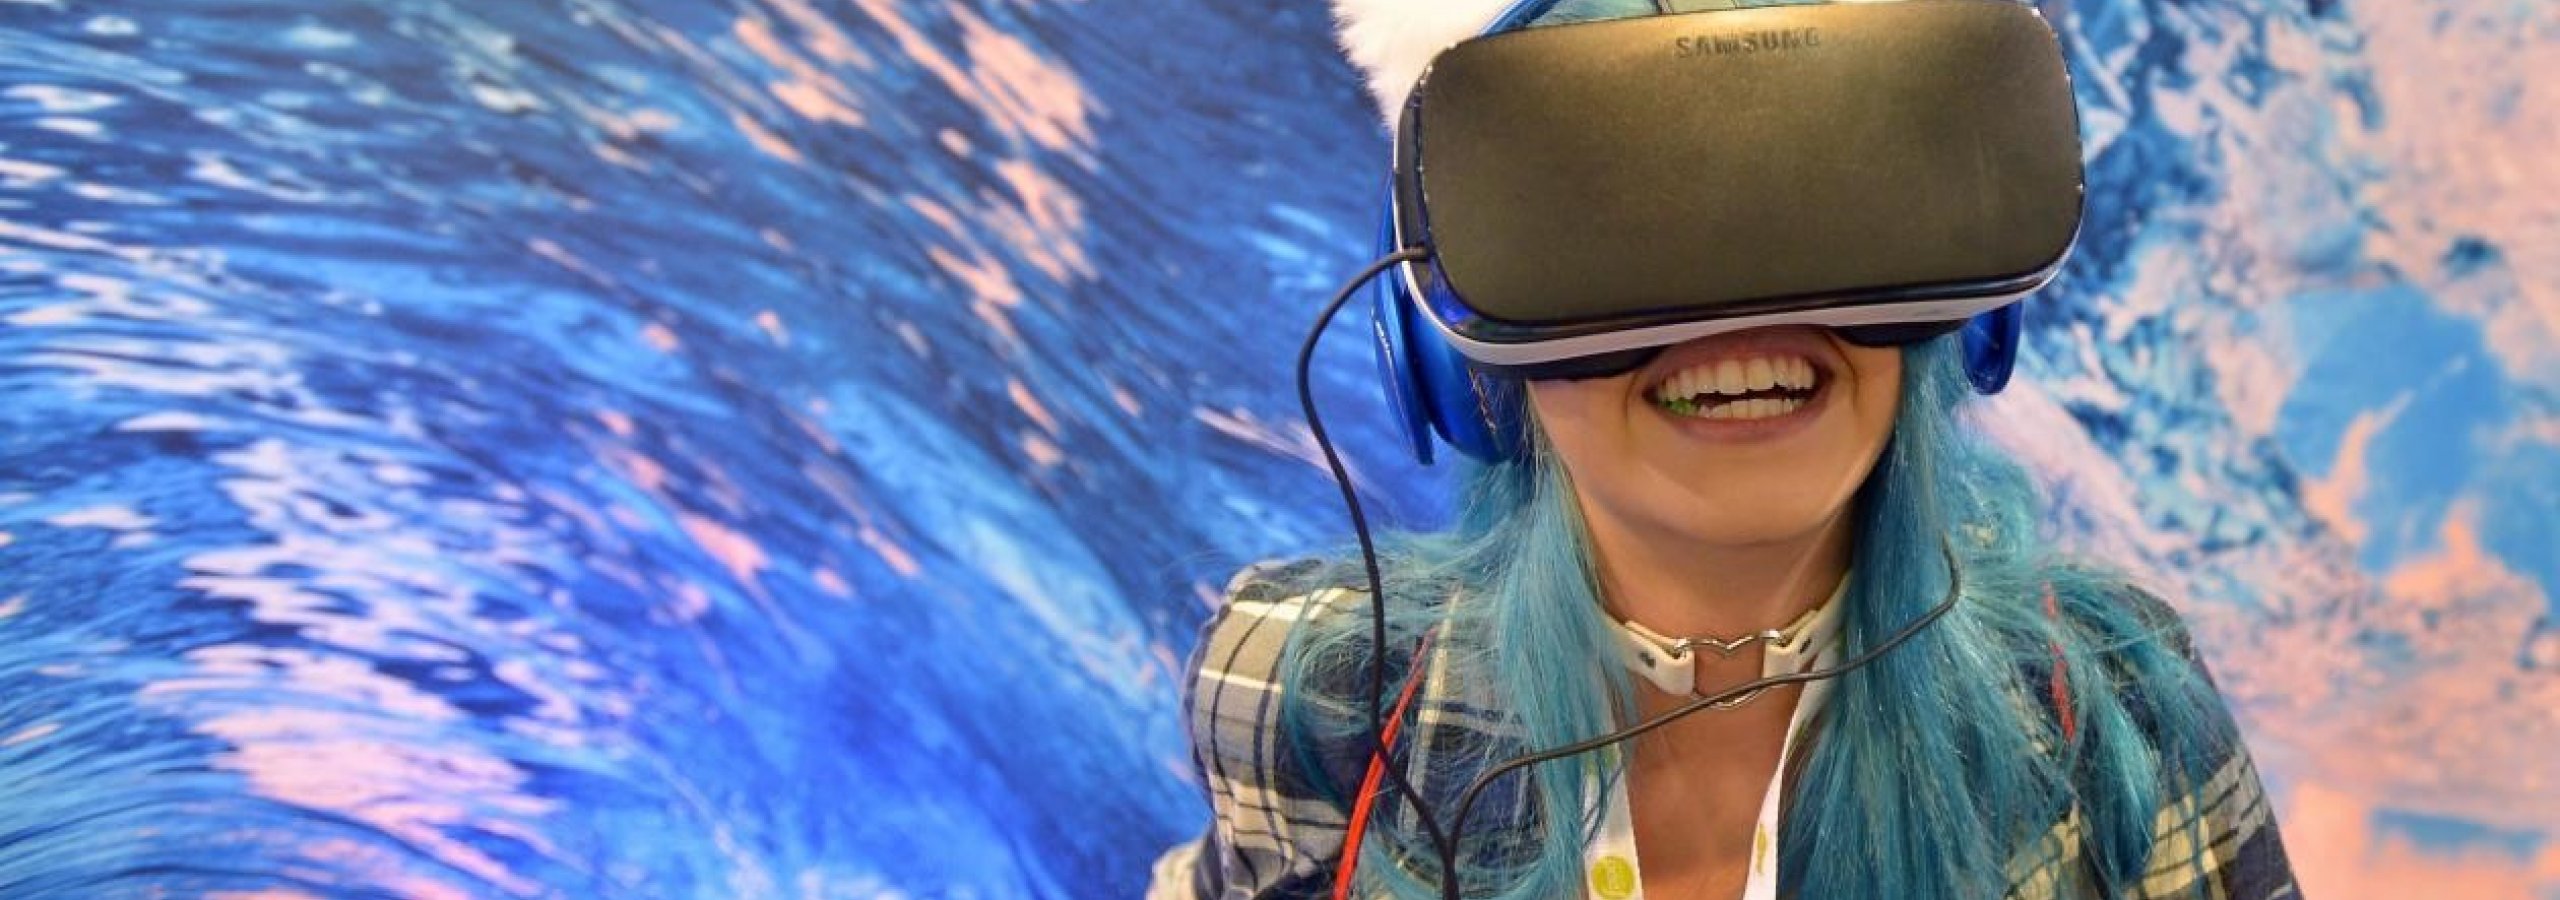 Girl wearing a VR headset in front of blue background